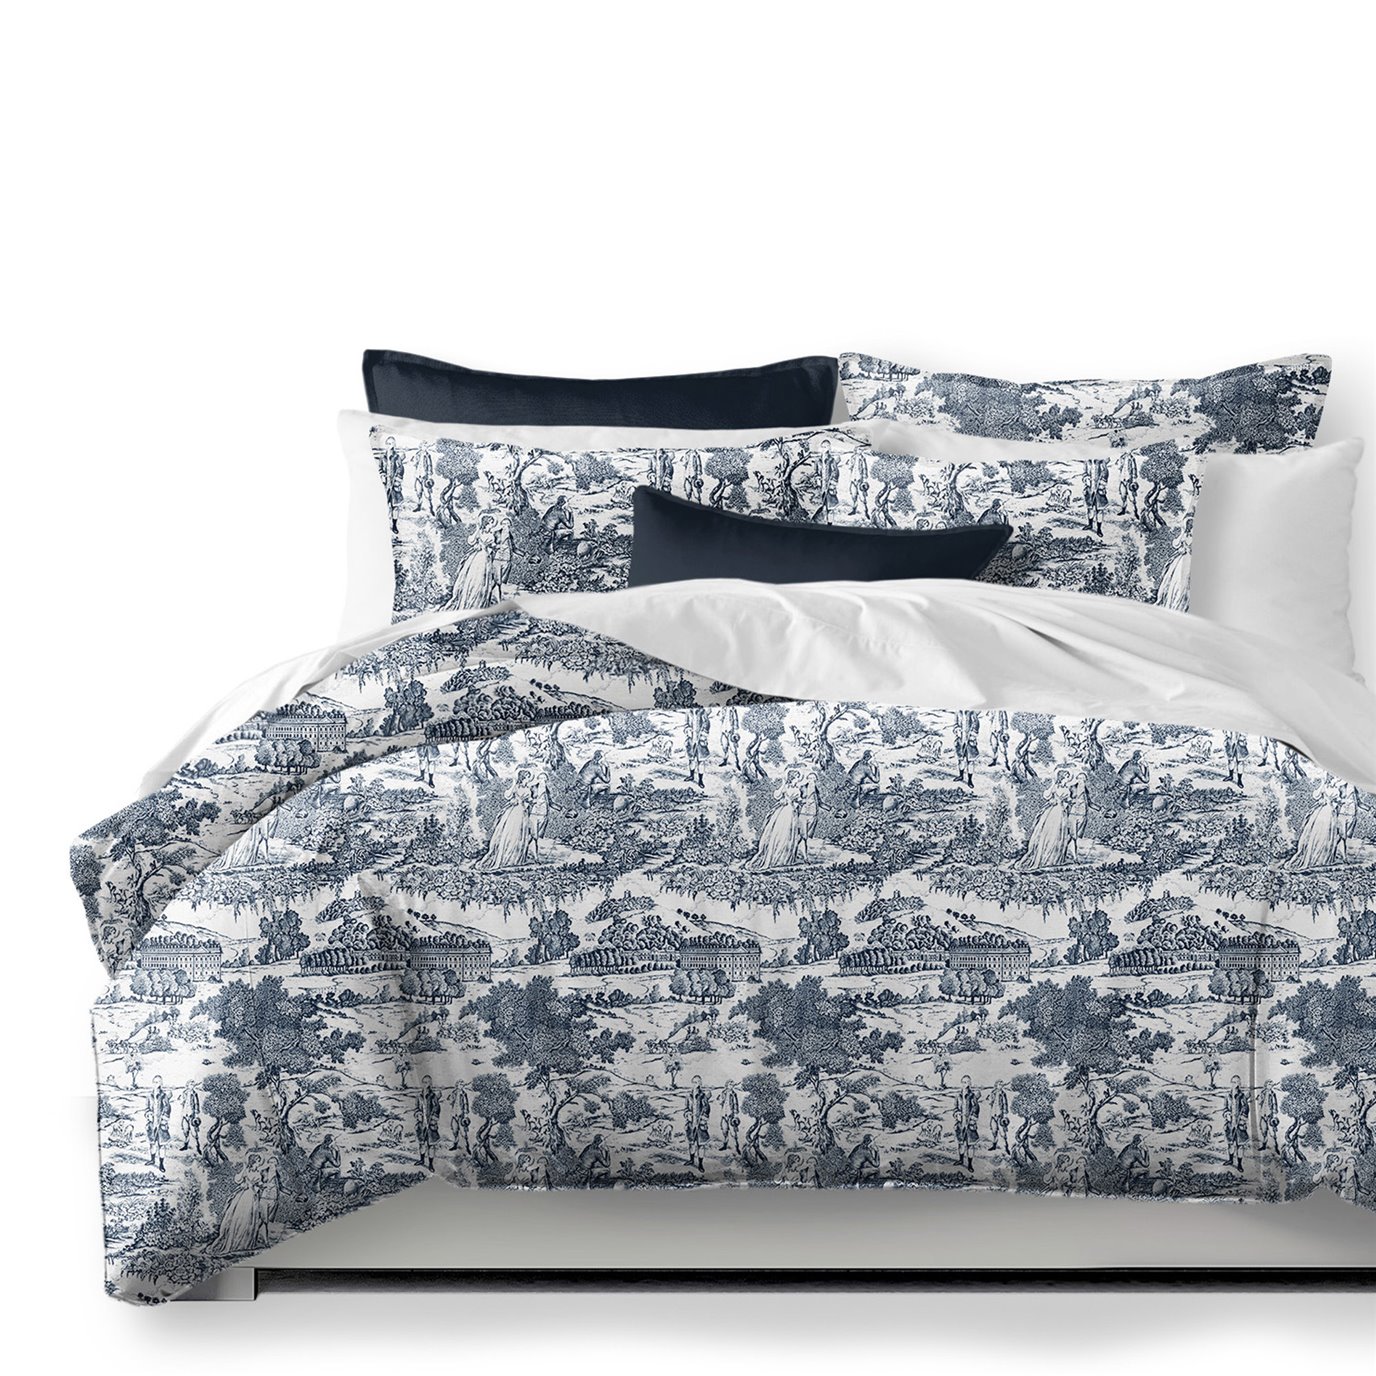 Beau Toile Blue Coverlet and Pillow Sham(s) Set - Size Queen